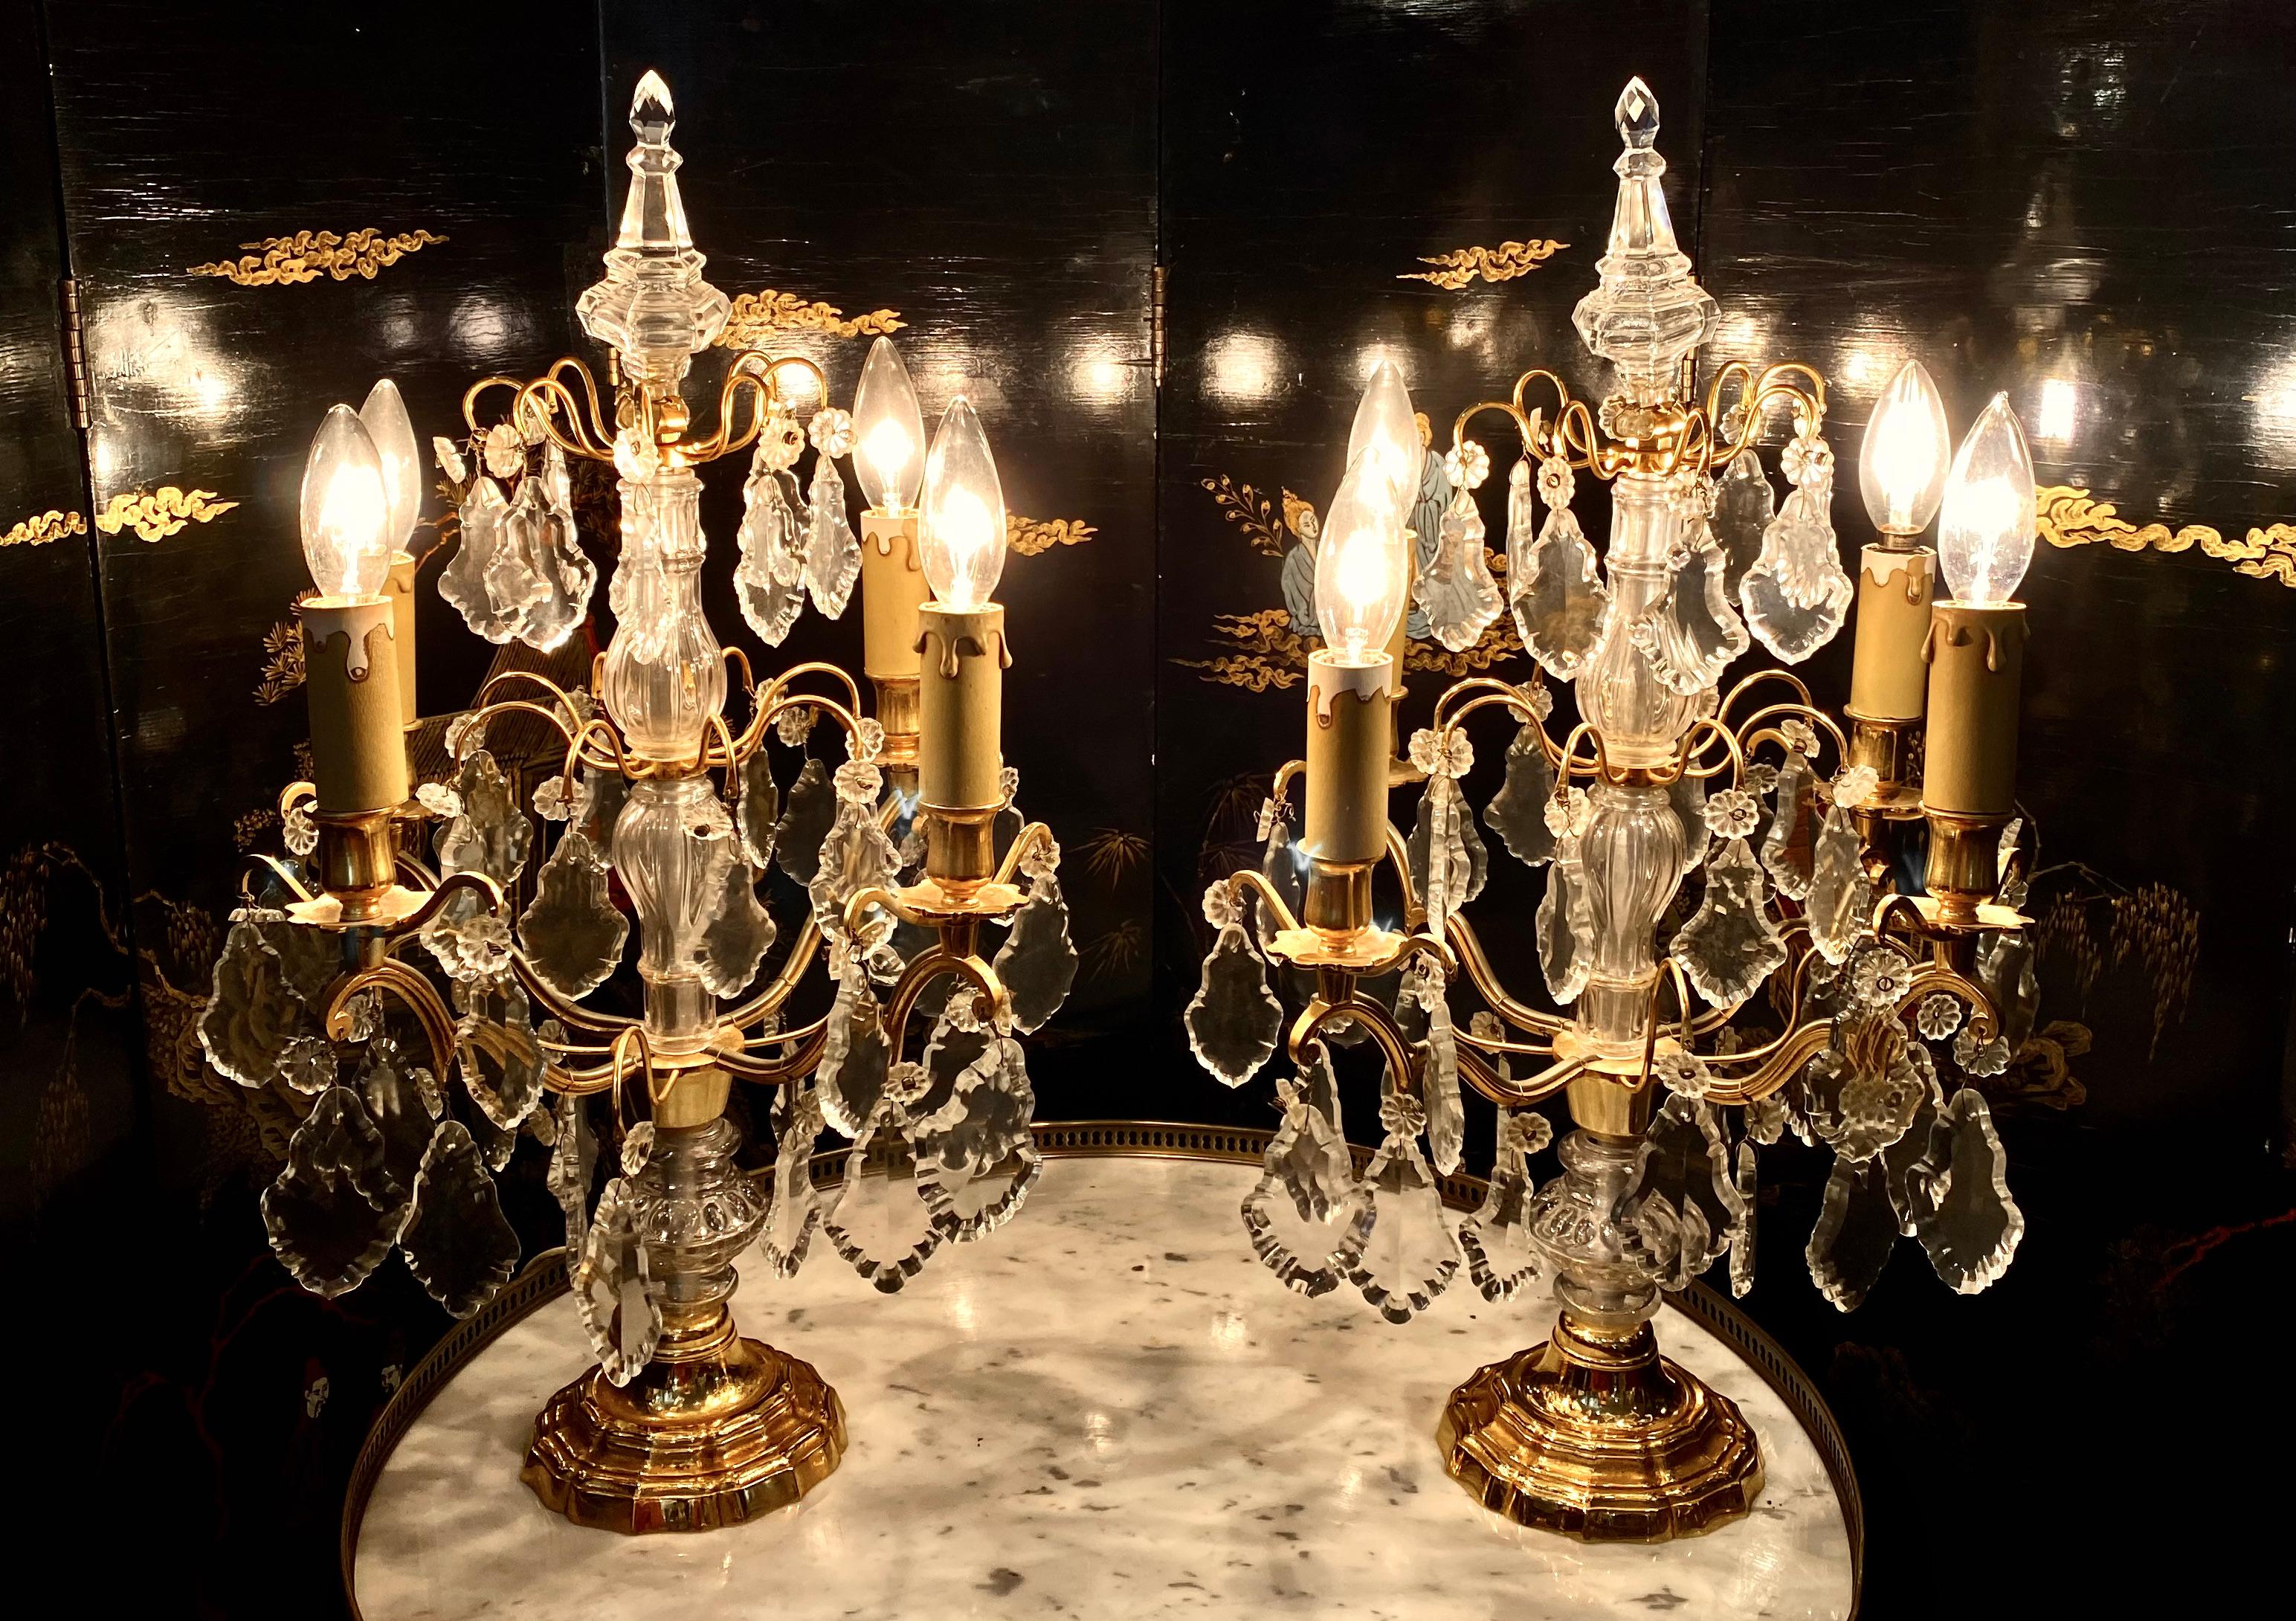 French pair of bronze girandoles candelabras with clear and amethyst crystals. Rare beautiful pair.

Dimensions: 17.5” H x 12” D
Base 5” D.